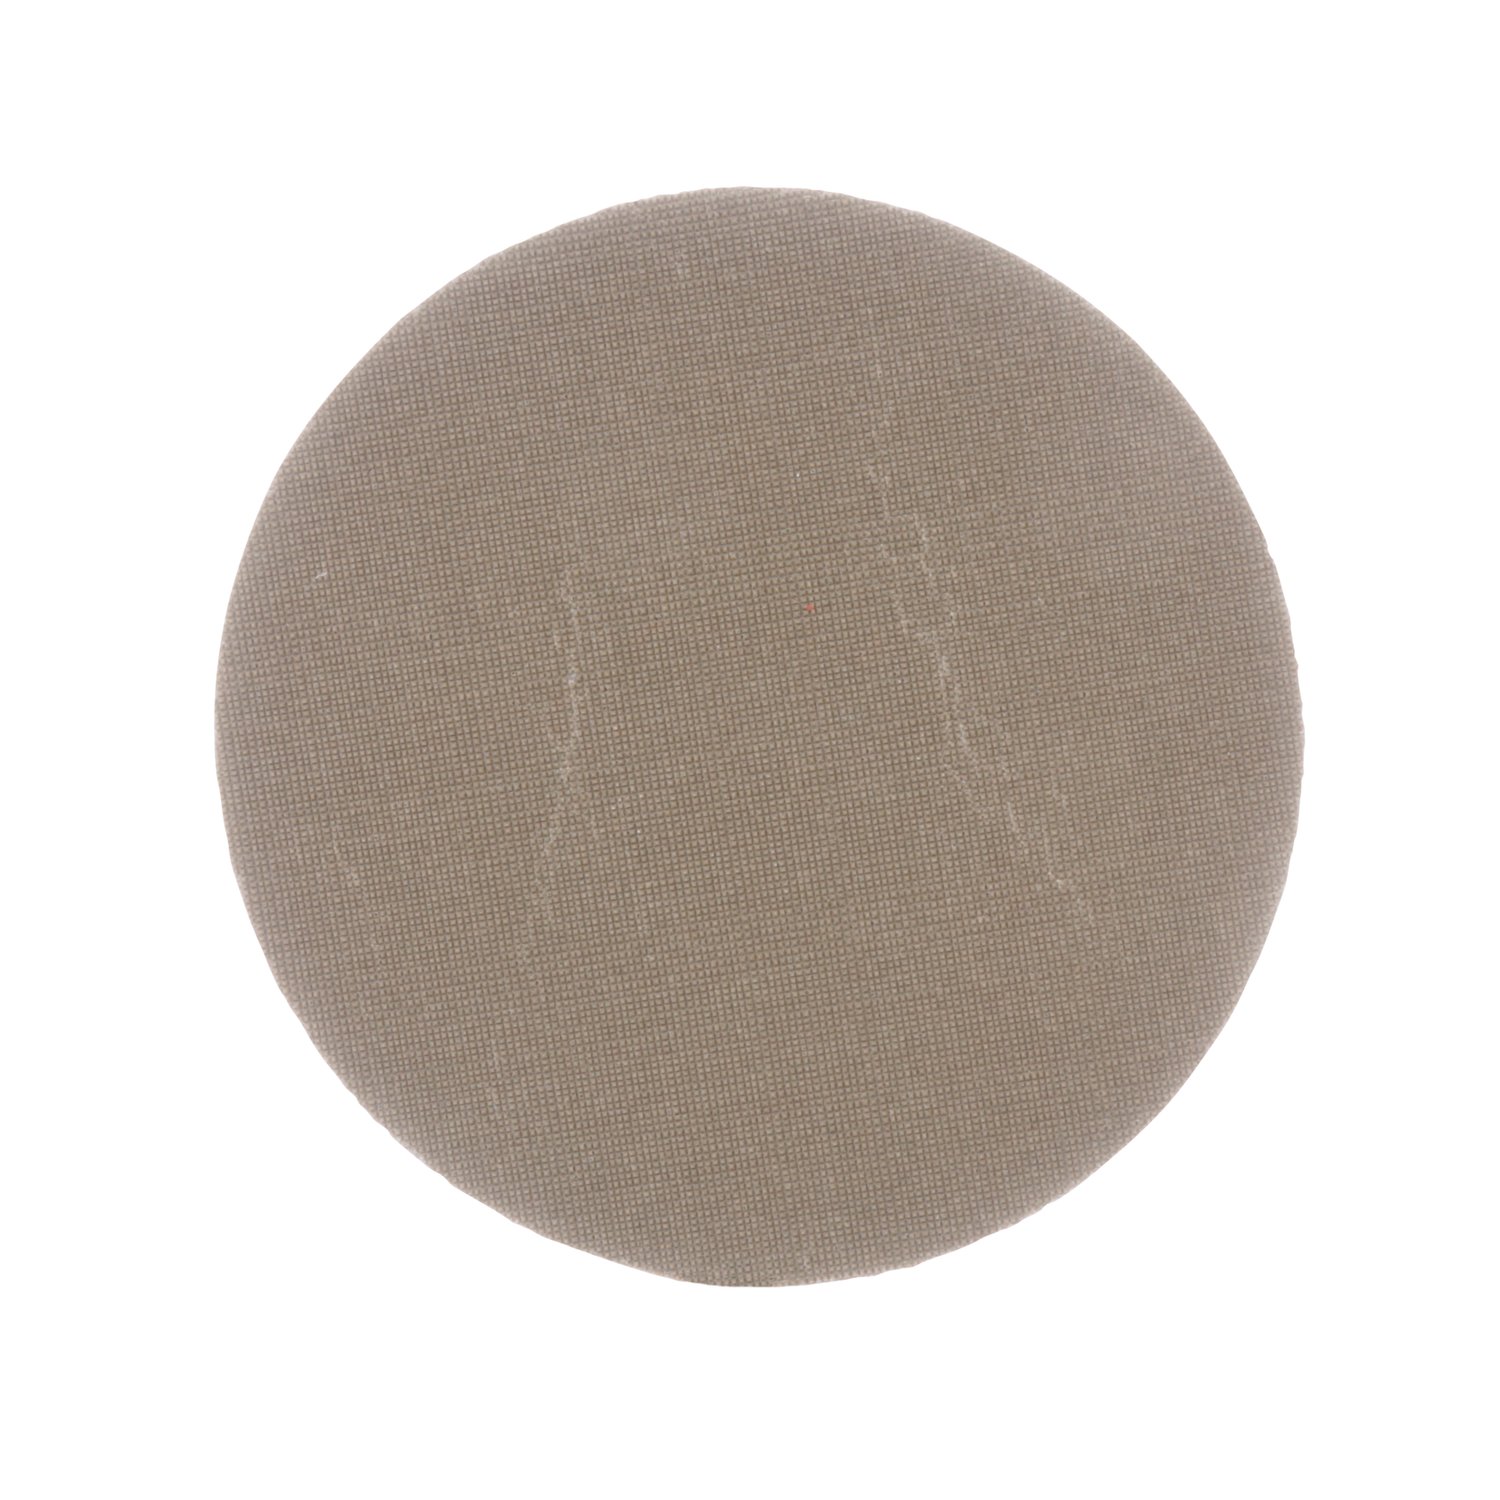 7010518609 - 3M Trizact PSA Cloth Disc 237AA, A45 X-weight, 2-1/2 in x NH, Die
250BB